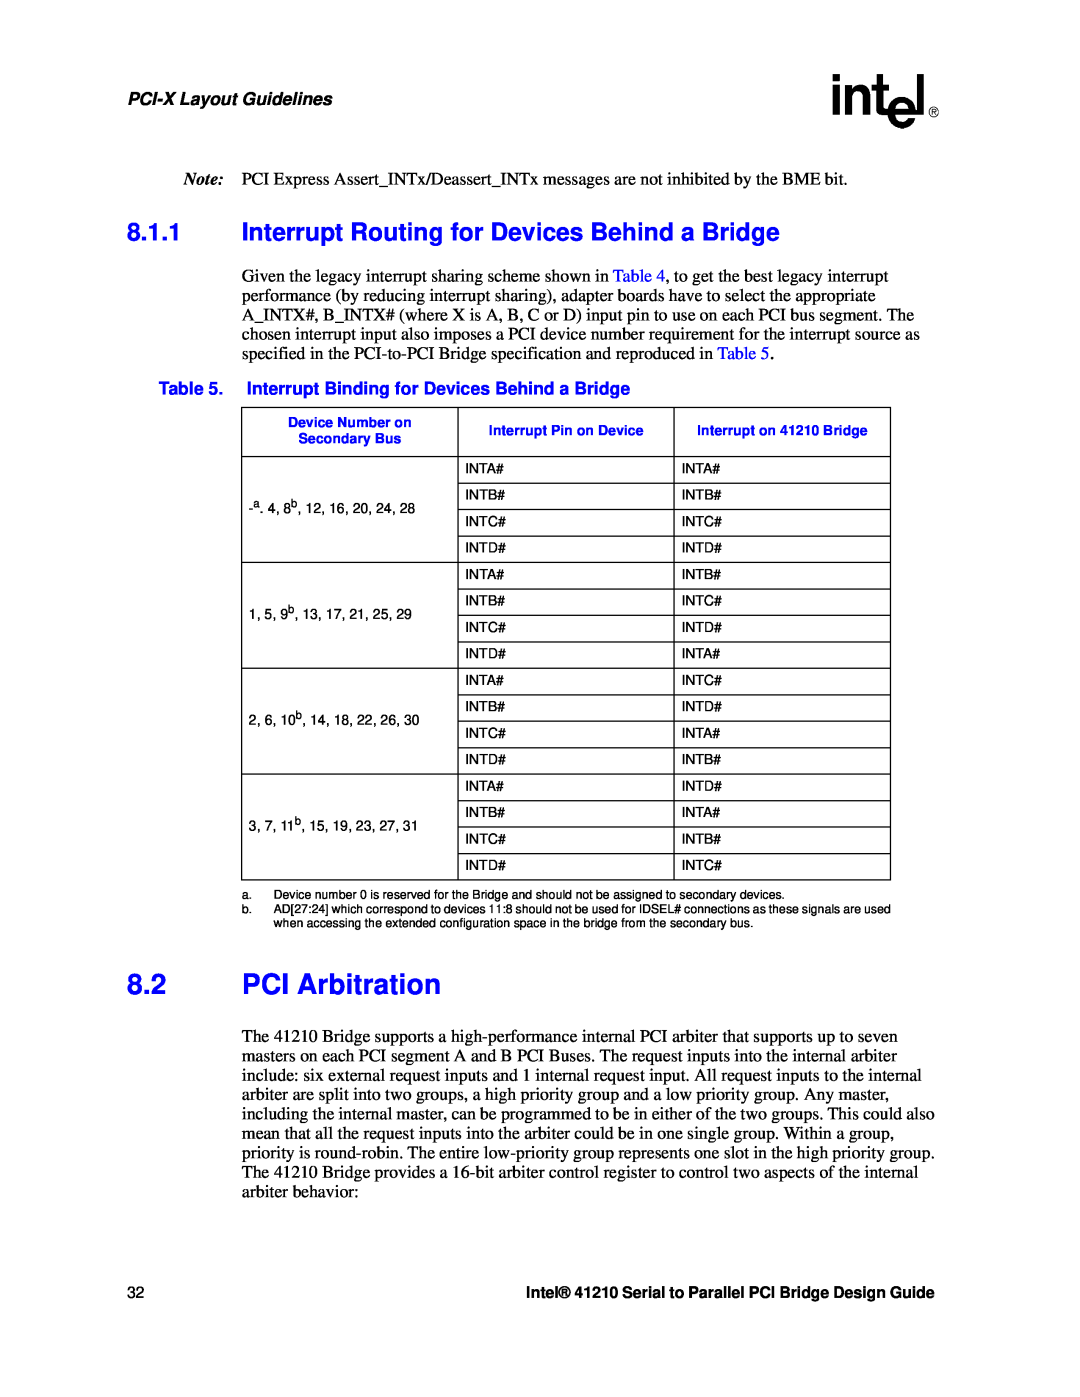 Intel 41210 manual PCI Arbitration, Interrupt Routing for Devices Behind a Bridge, PCI-X Layout Guidelines 